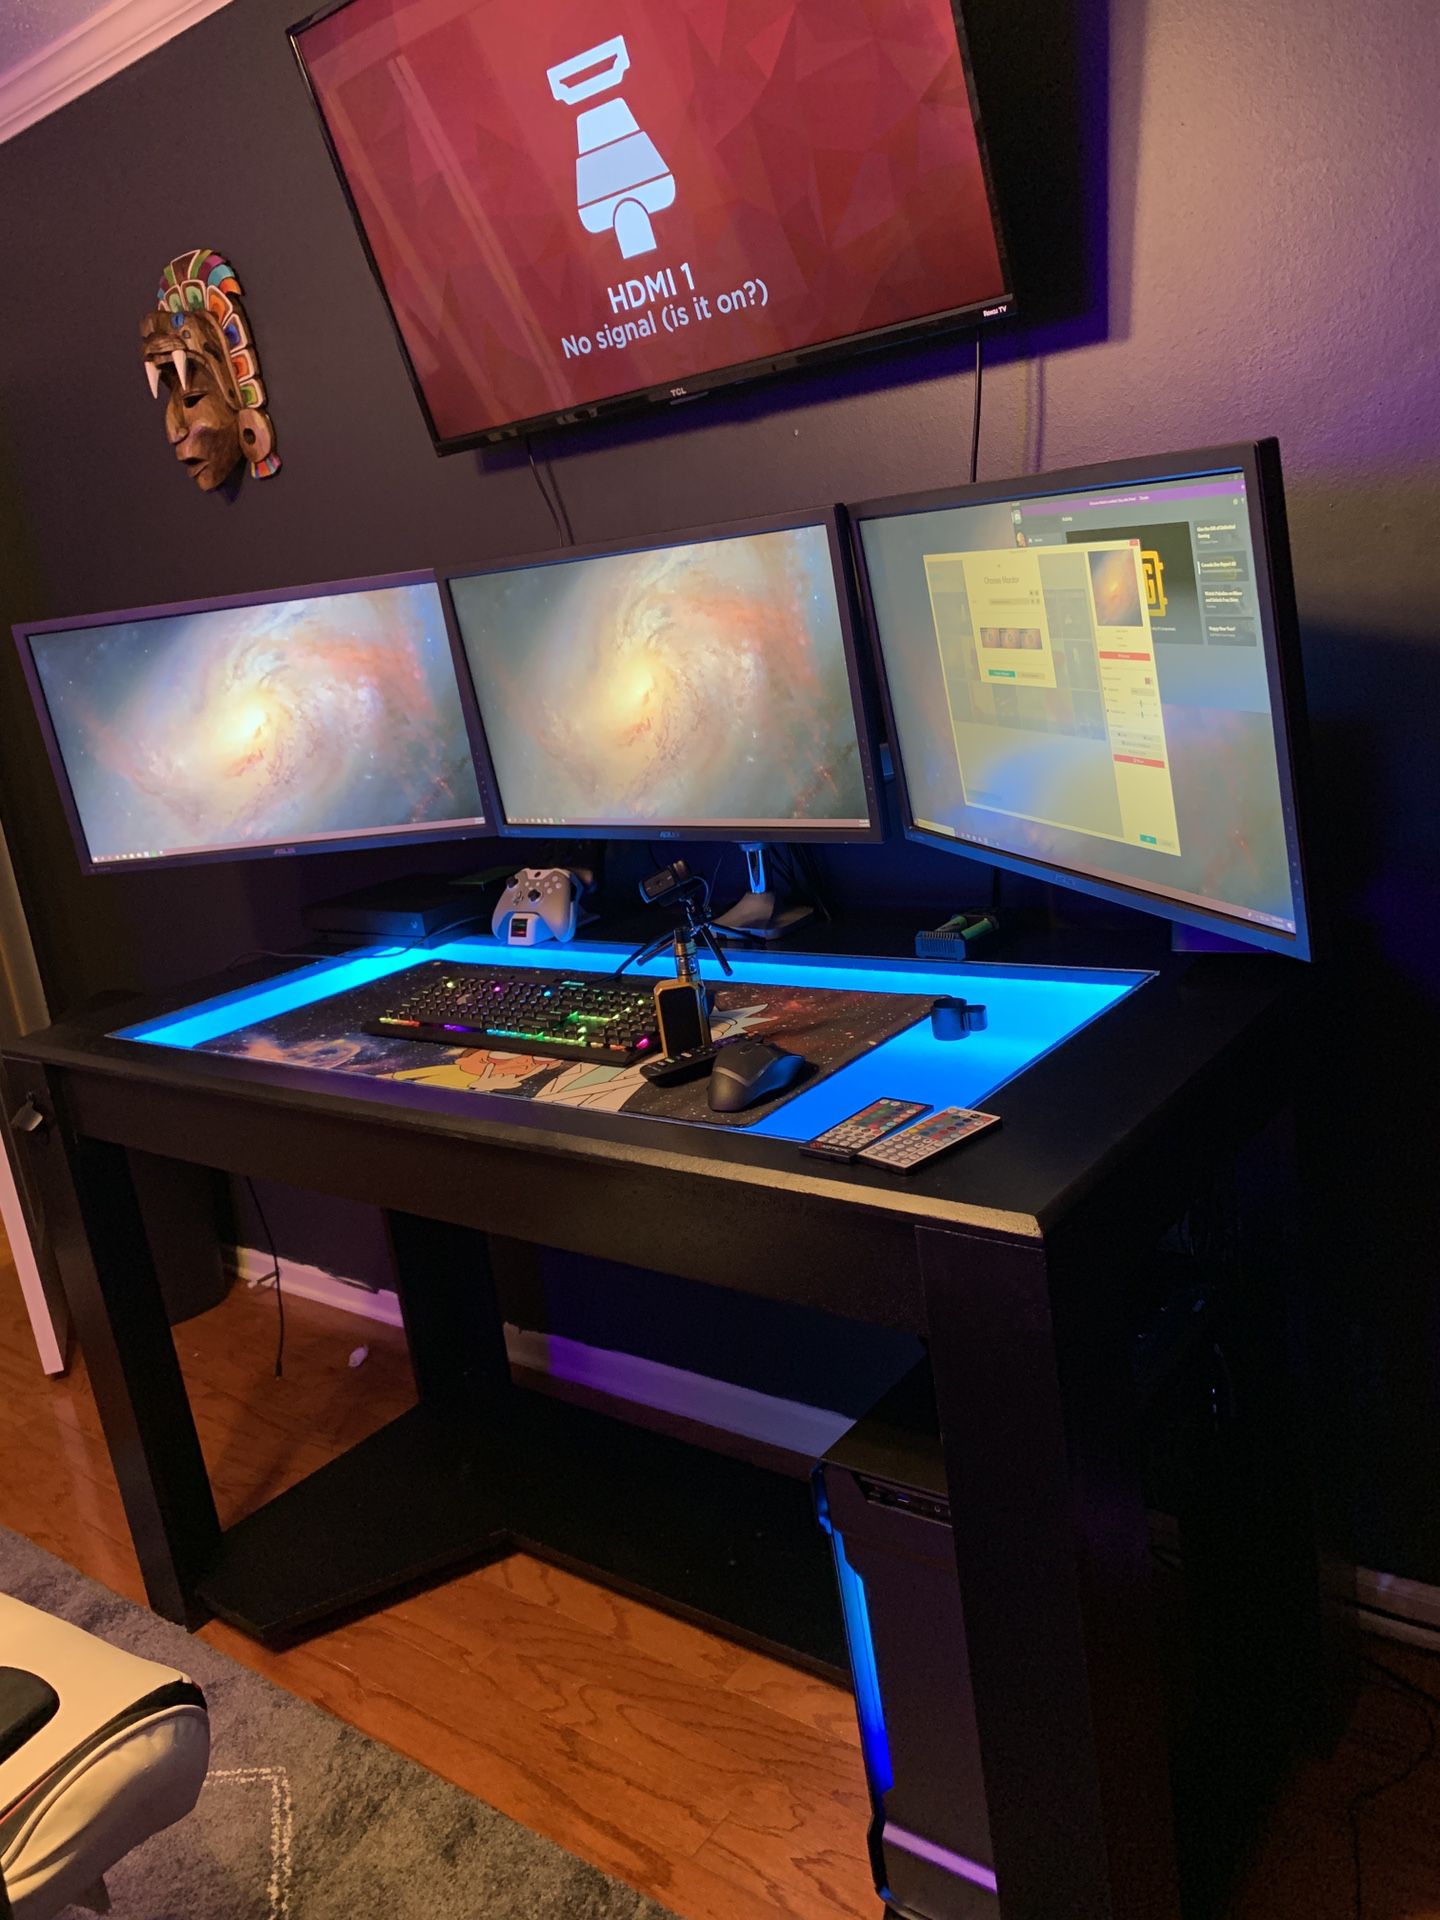 Full Streaming Station with Exotic PC, Xbox 1 X, 3 4K Monitors, 4K Smart TV, DXRacing chair, custom shadow box desk, Scuff Elite Controller